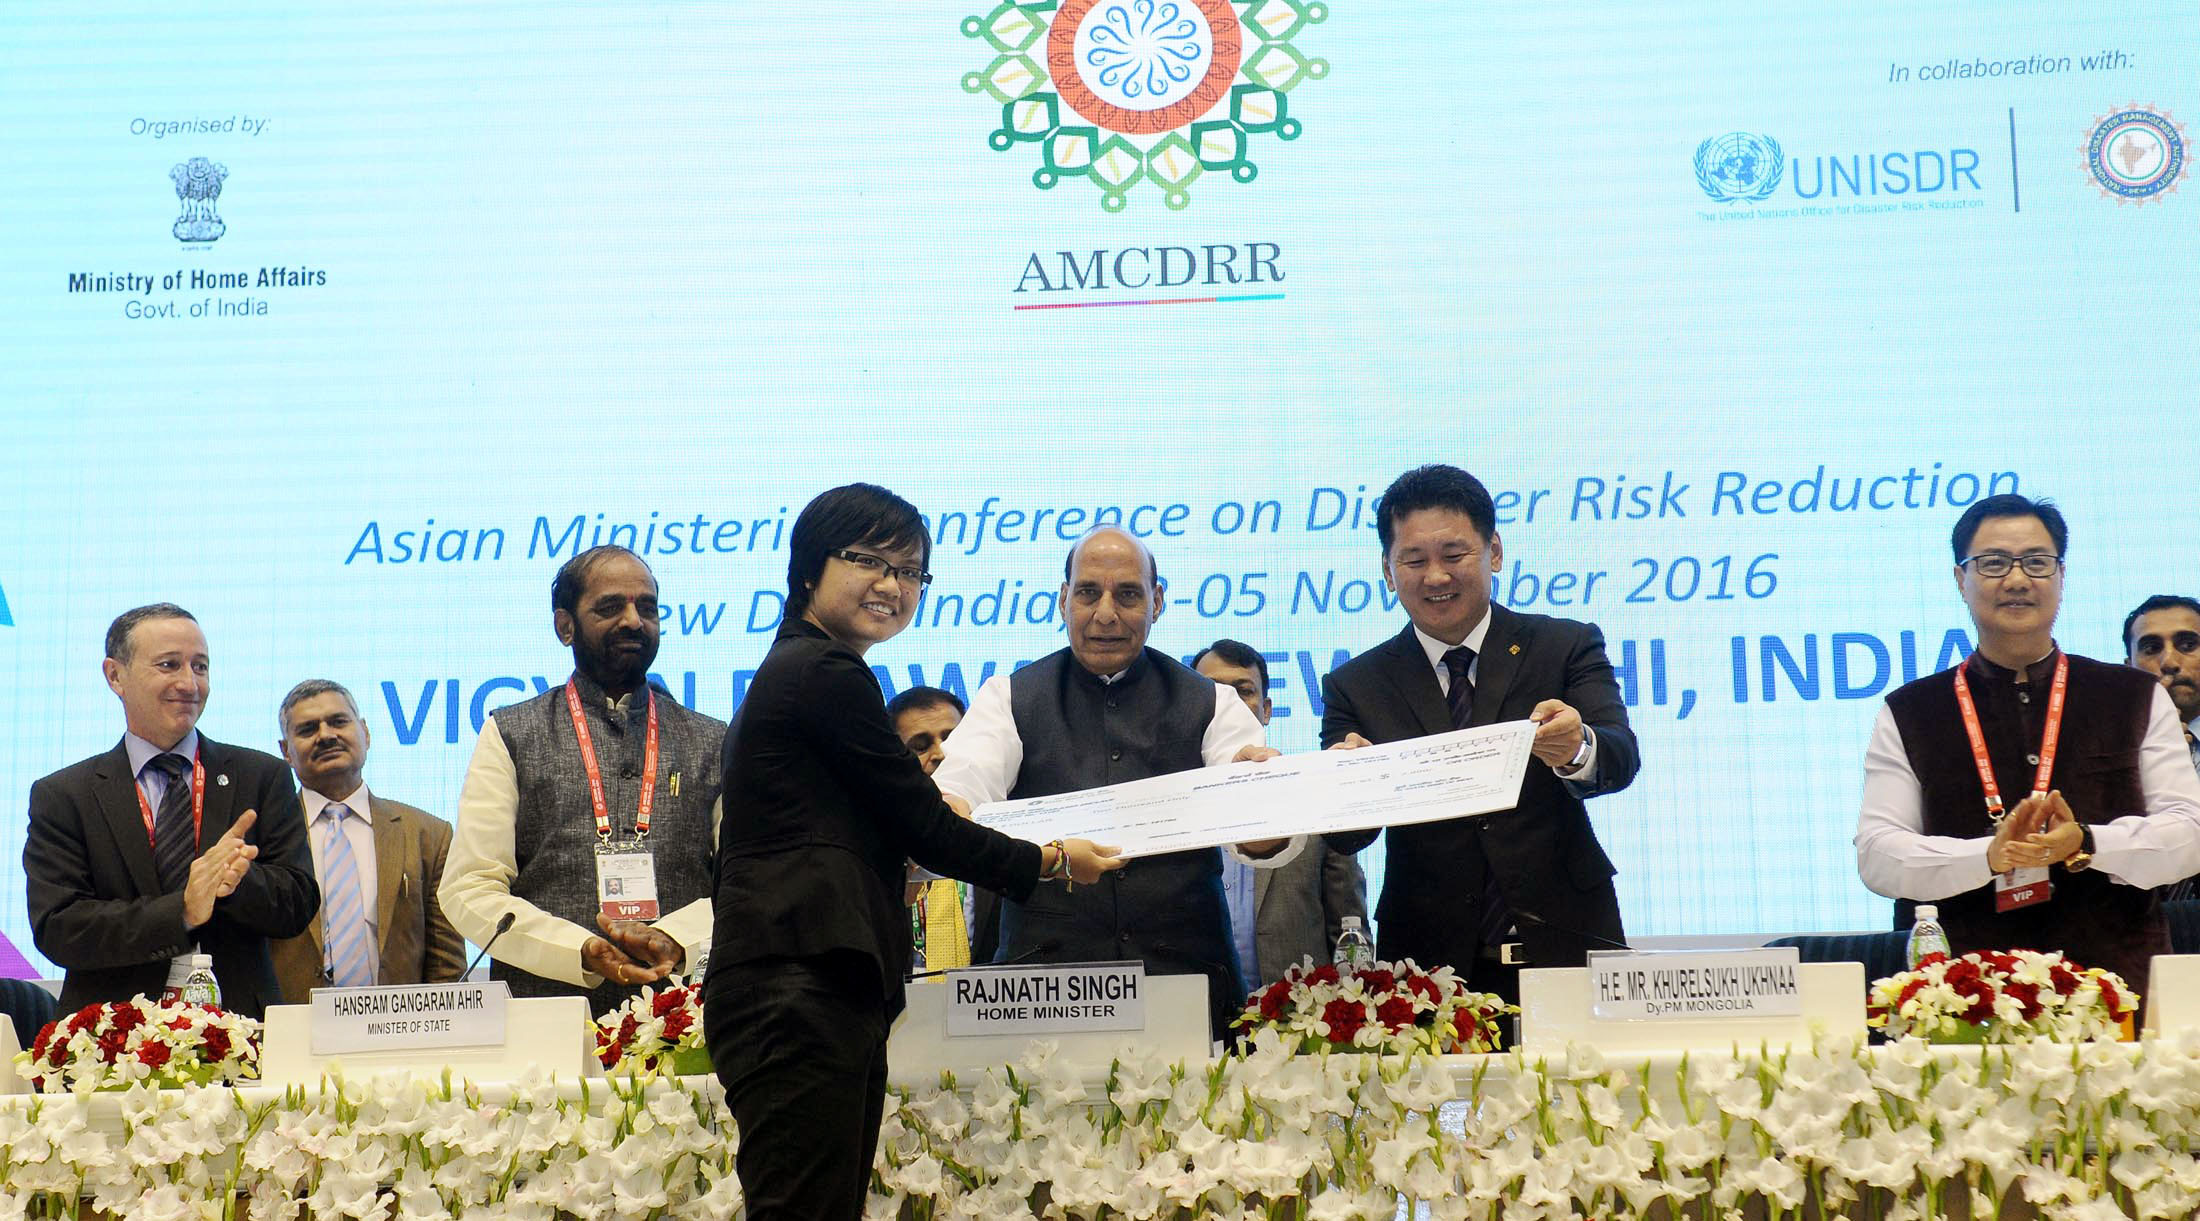 The Union Home Minister, Shri Rajnath Singh at the closing ceremony of the Asian Ministerial Conference for Disaster Risk Reduction (AMCDRR) 2016, in New Delhi on November 05, 2016.  The Ministers of State for Home Affairs, Shri Hansraj Gangaram Ahir & Shri Kiren Rijiju and other dignitaries are also seen.